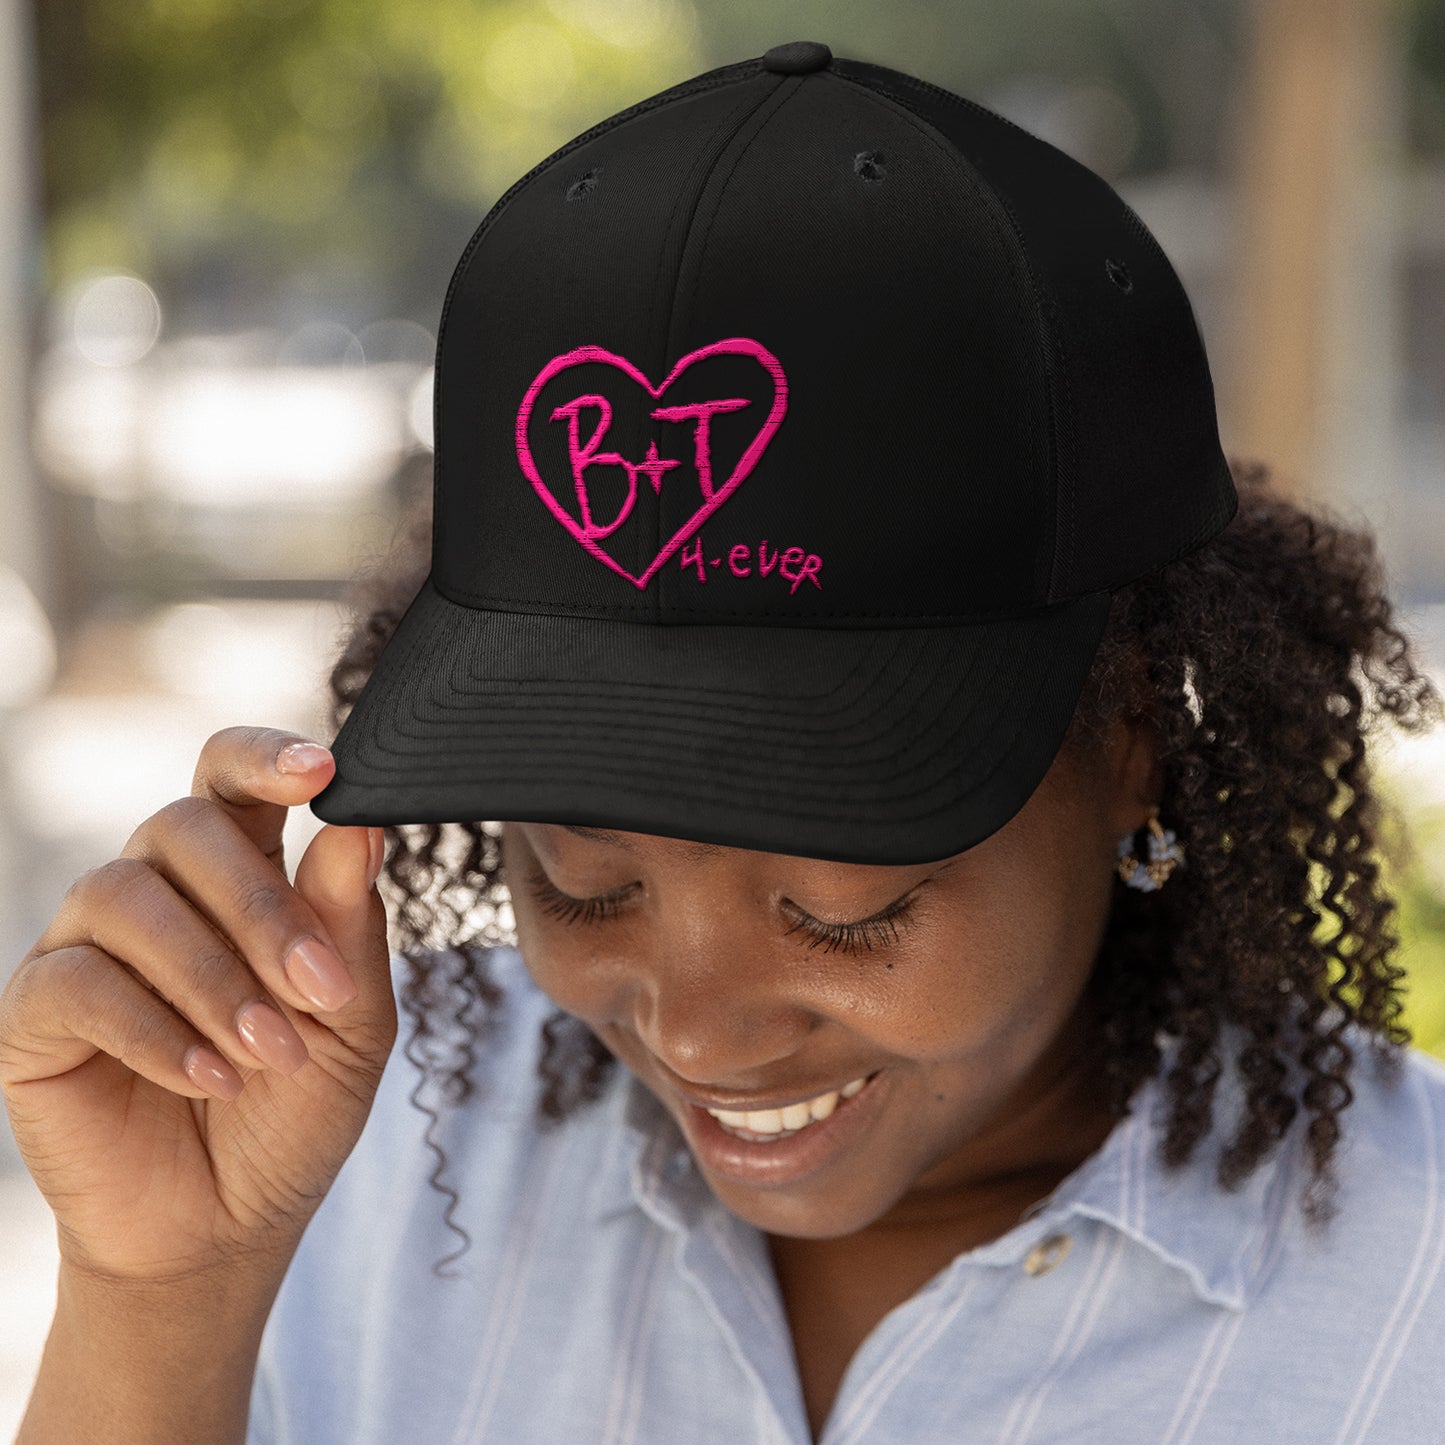 A female model wearing a black baseball hat. On the front of the hat is a pink heart with B & J inside it. Next to the heart is pink text saying 4 ever. Behind the model is a blurred park area.